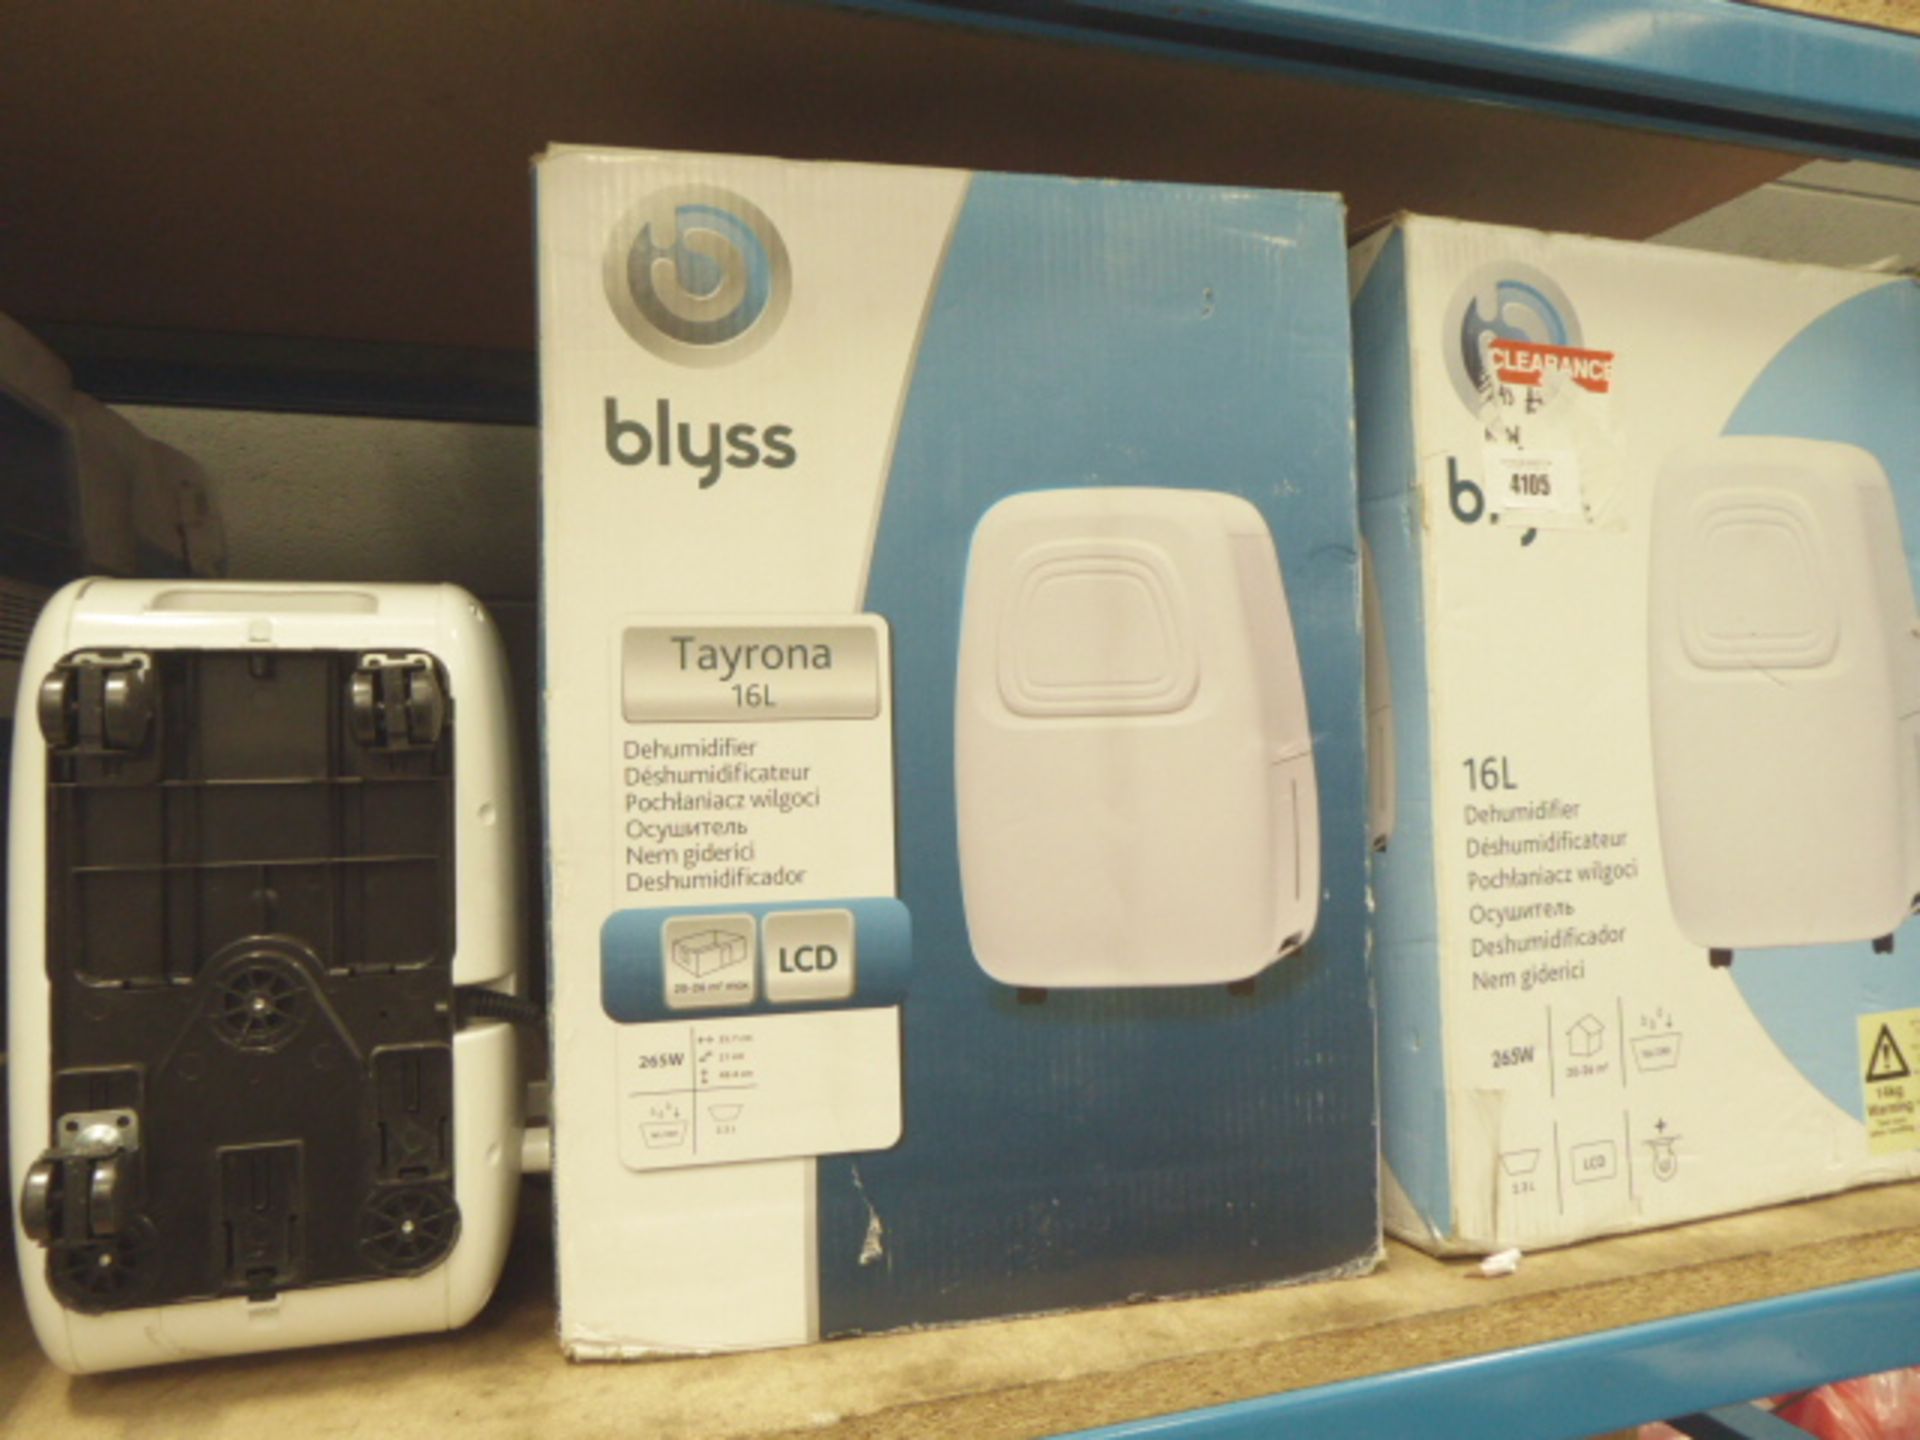 2 boxed Blyss dehumidifiers and one unboxed